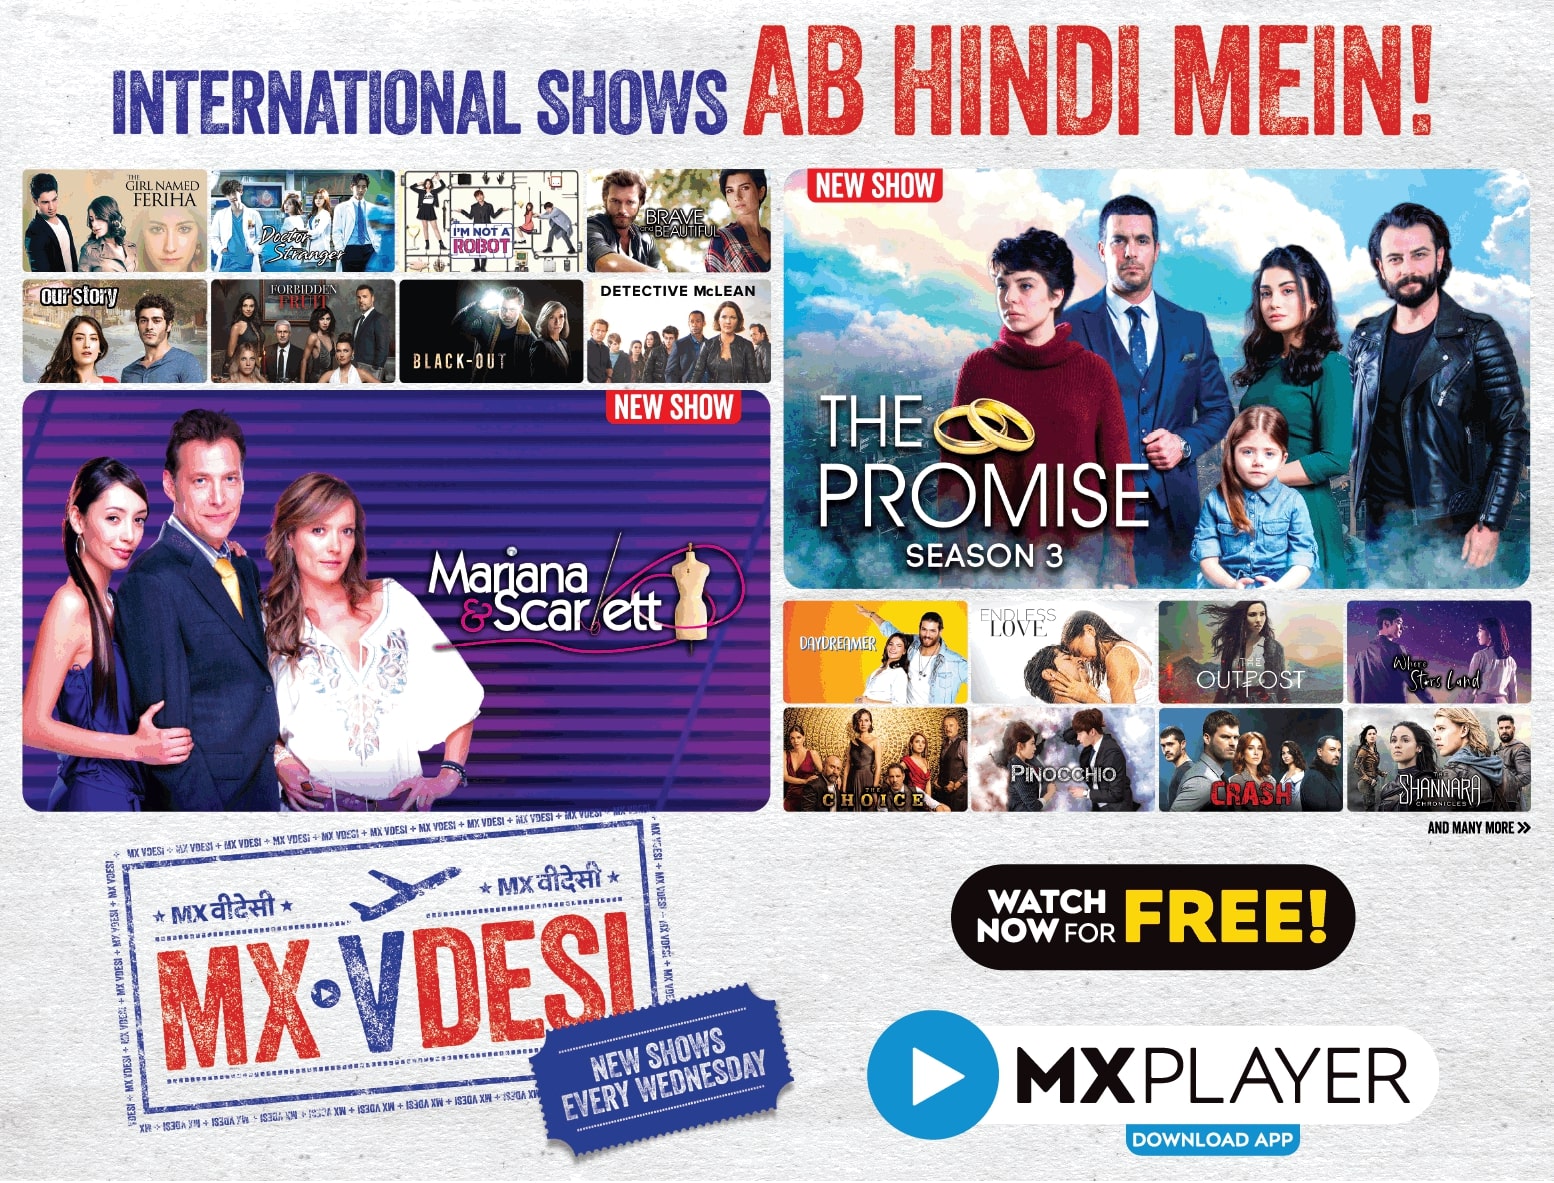 mxplayer-download-app-international-shows-ab-hindi-mein-ad-bombay-times-21-04-2021